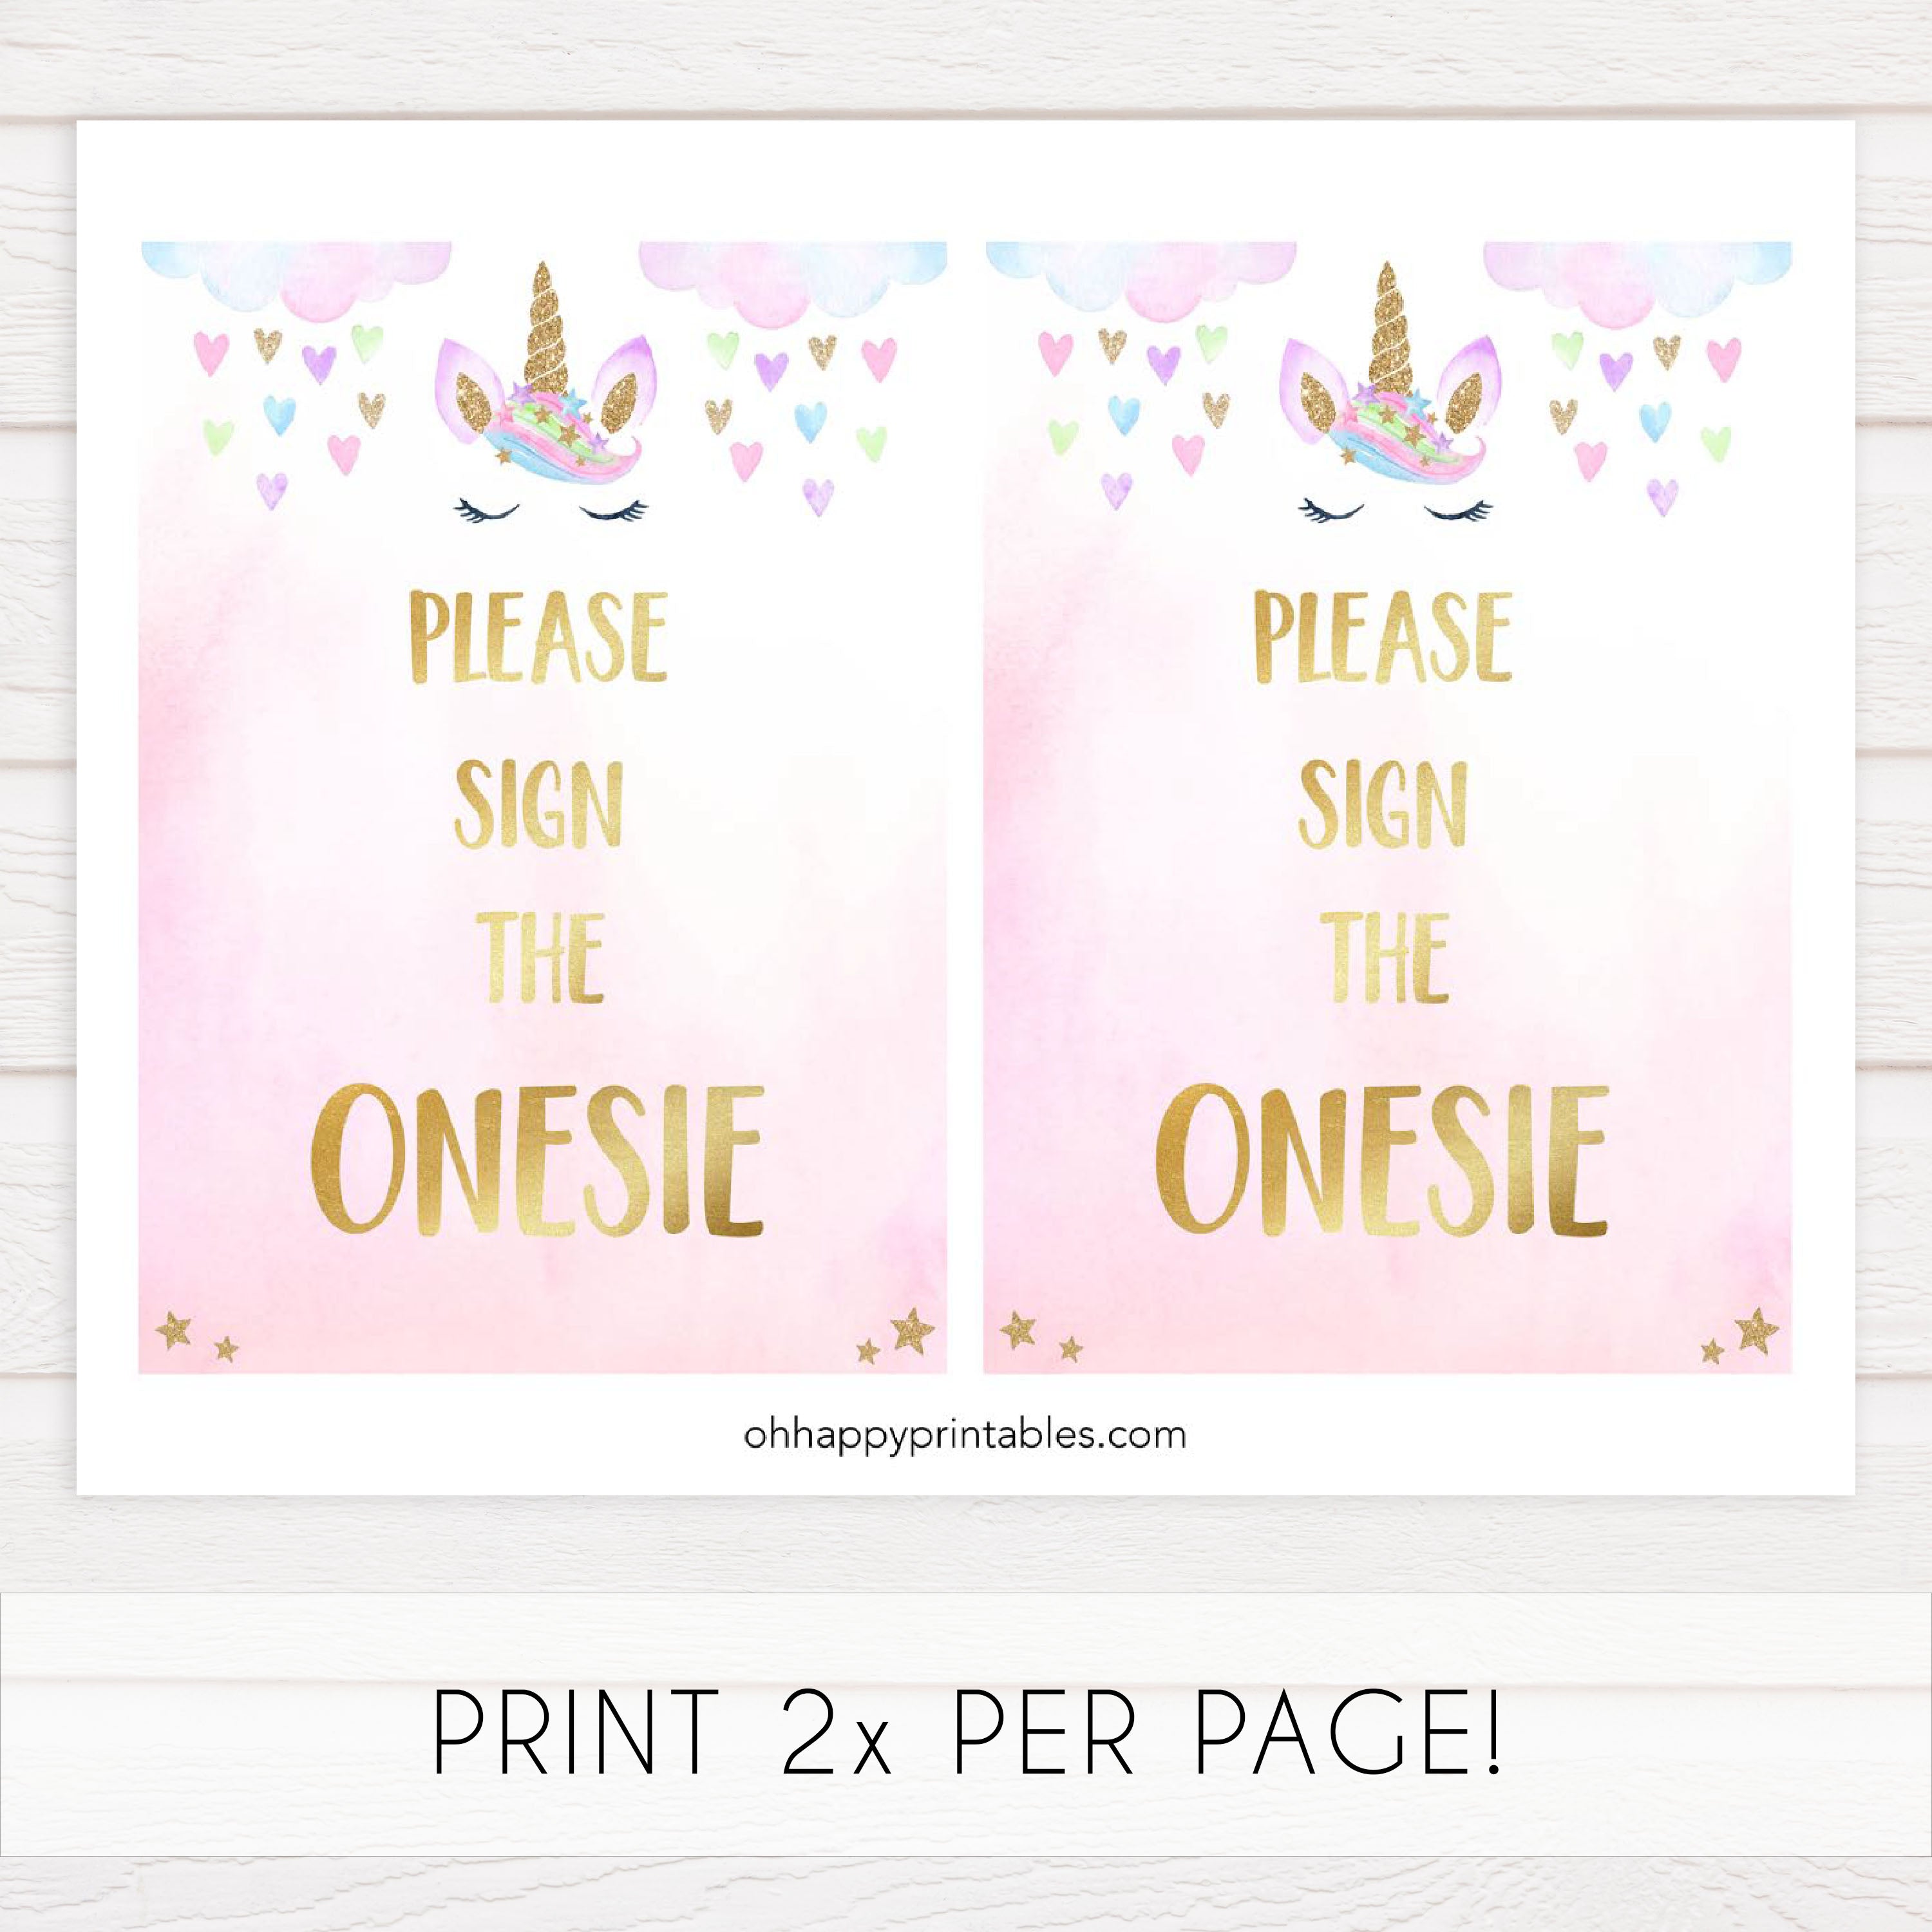 sign the onesie sign, Printable baby shower games, unicorn baby games, baby shower games, fun baby shower ideas, top baby shower ideas, unicorn baby shower, baby shower games, fun unicorn baby shower ideas